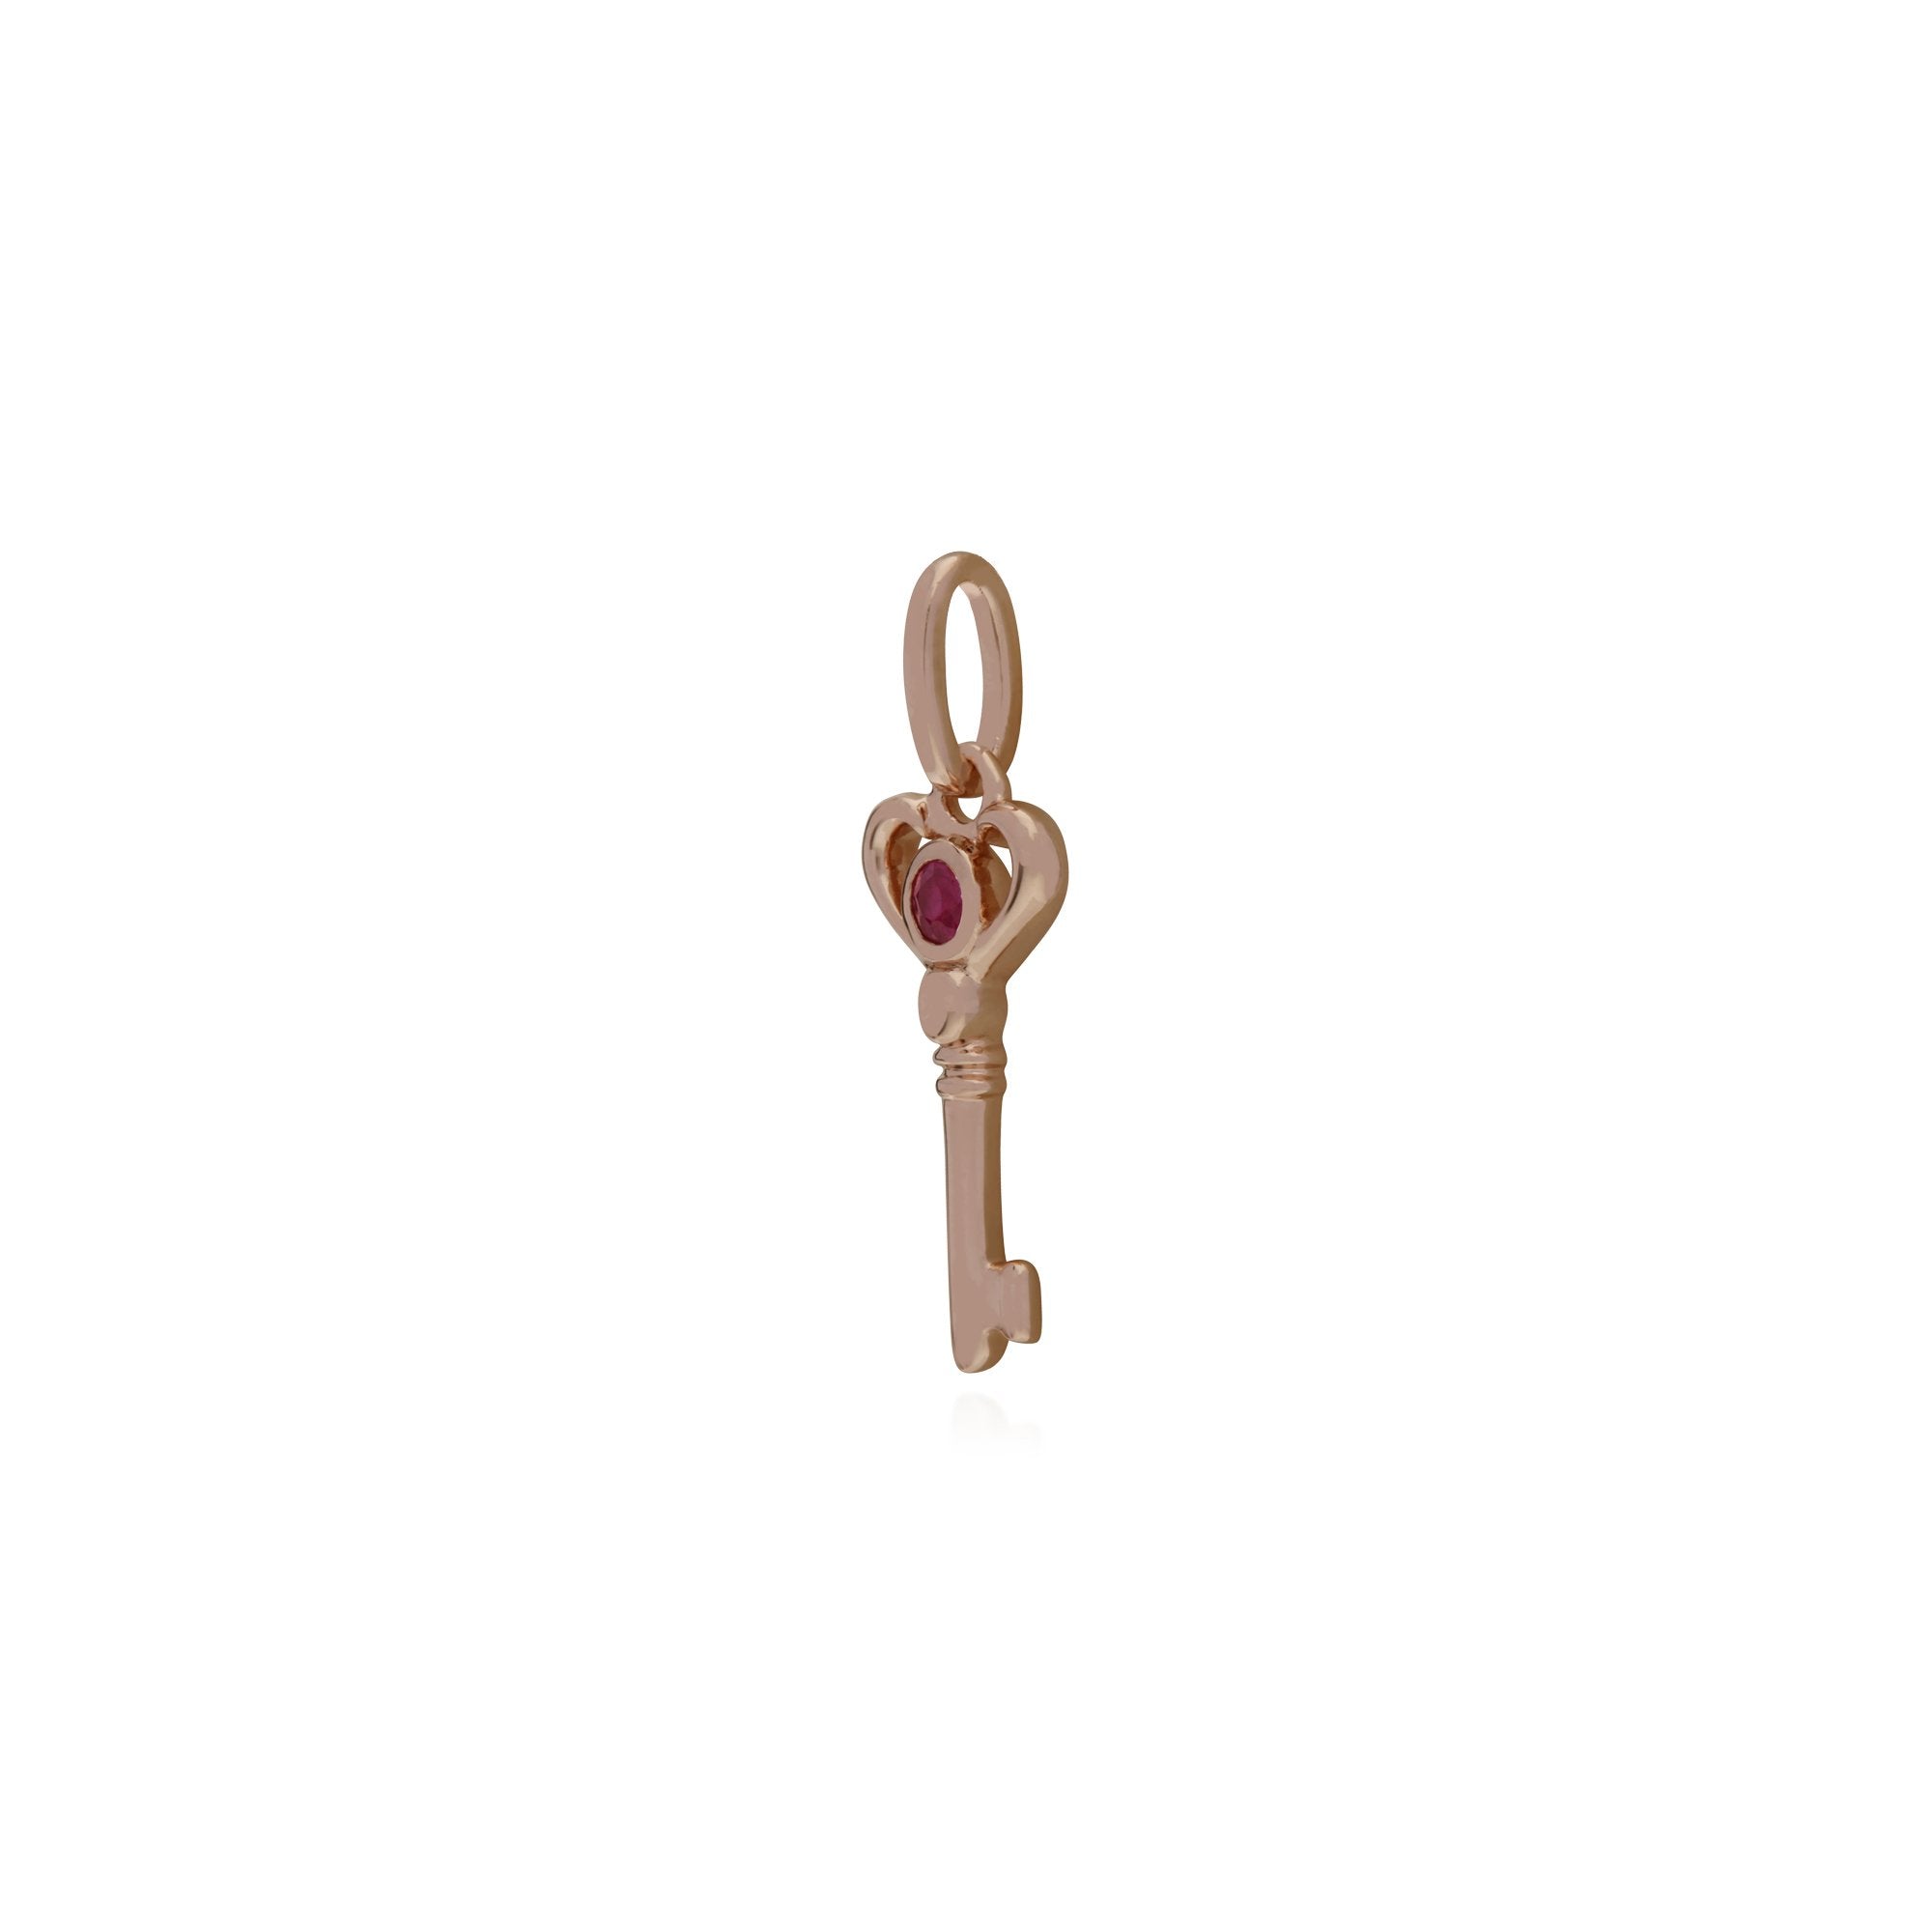 Gemondo Rose Gold Plated Sterling Silver Ruby Small Key Charm